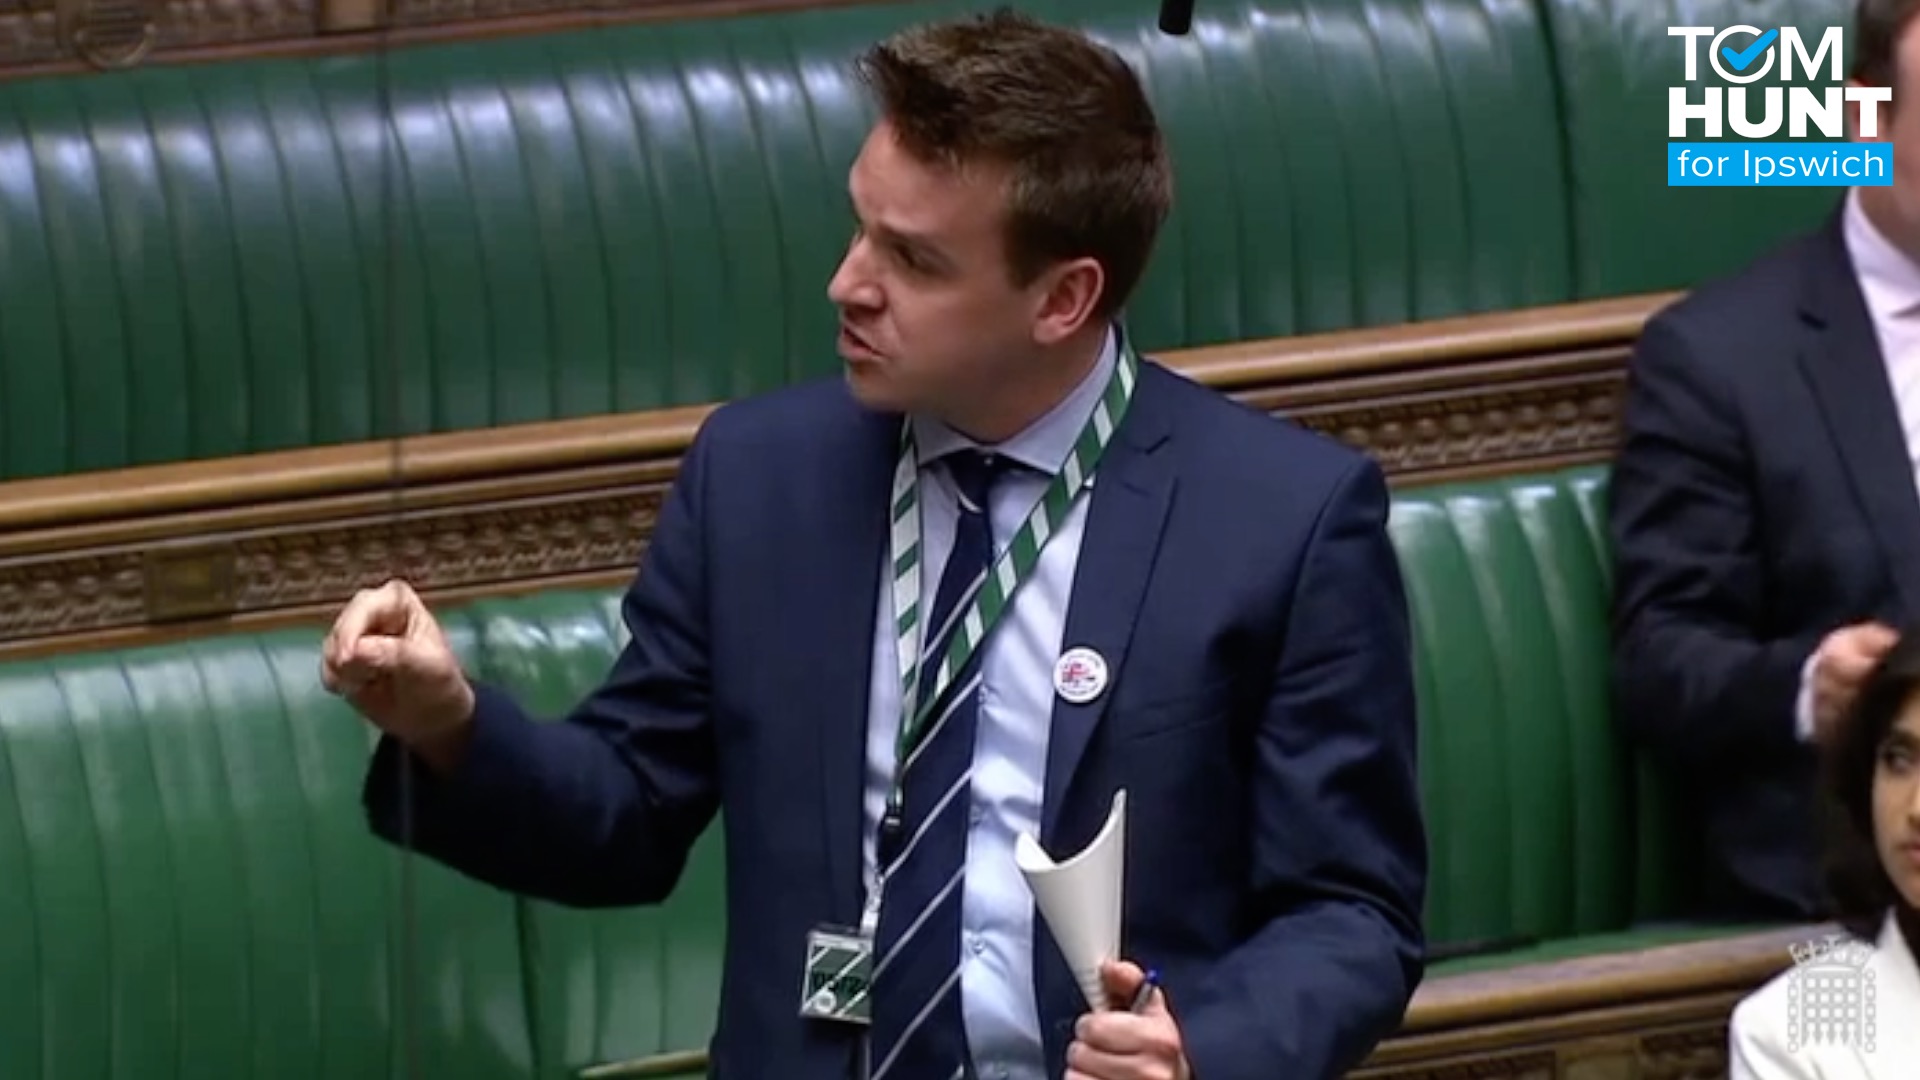 Yesterday I was pleased to be able to raise my concerns about social media use in prisons directly with Ministers in the House of Commons Chamber. I must say I was pleased with the response I received. It definitely seems like the Government are listening and that things will be tightened up. I am very glad that automatic early release for serious offenders is coming to an end. About time!